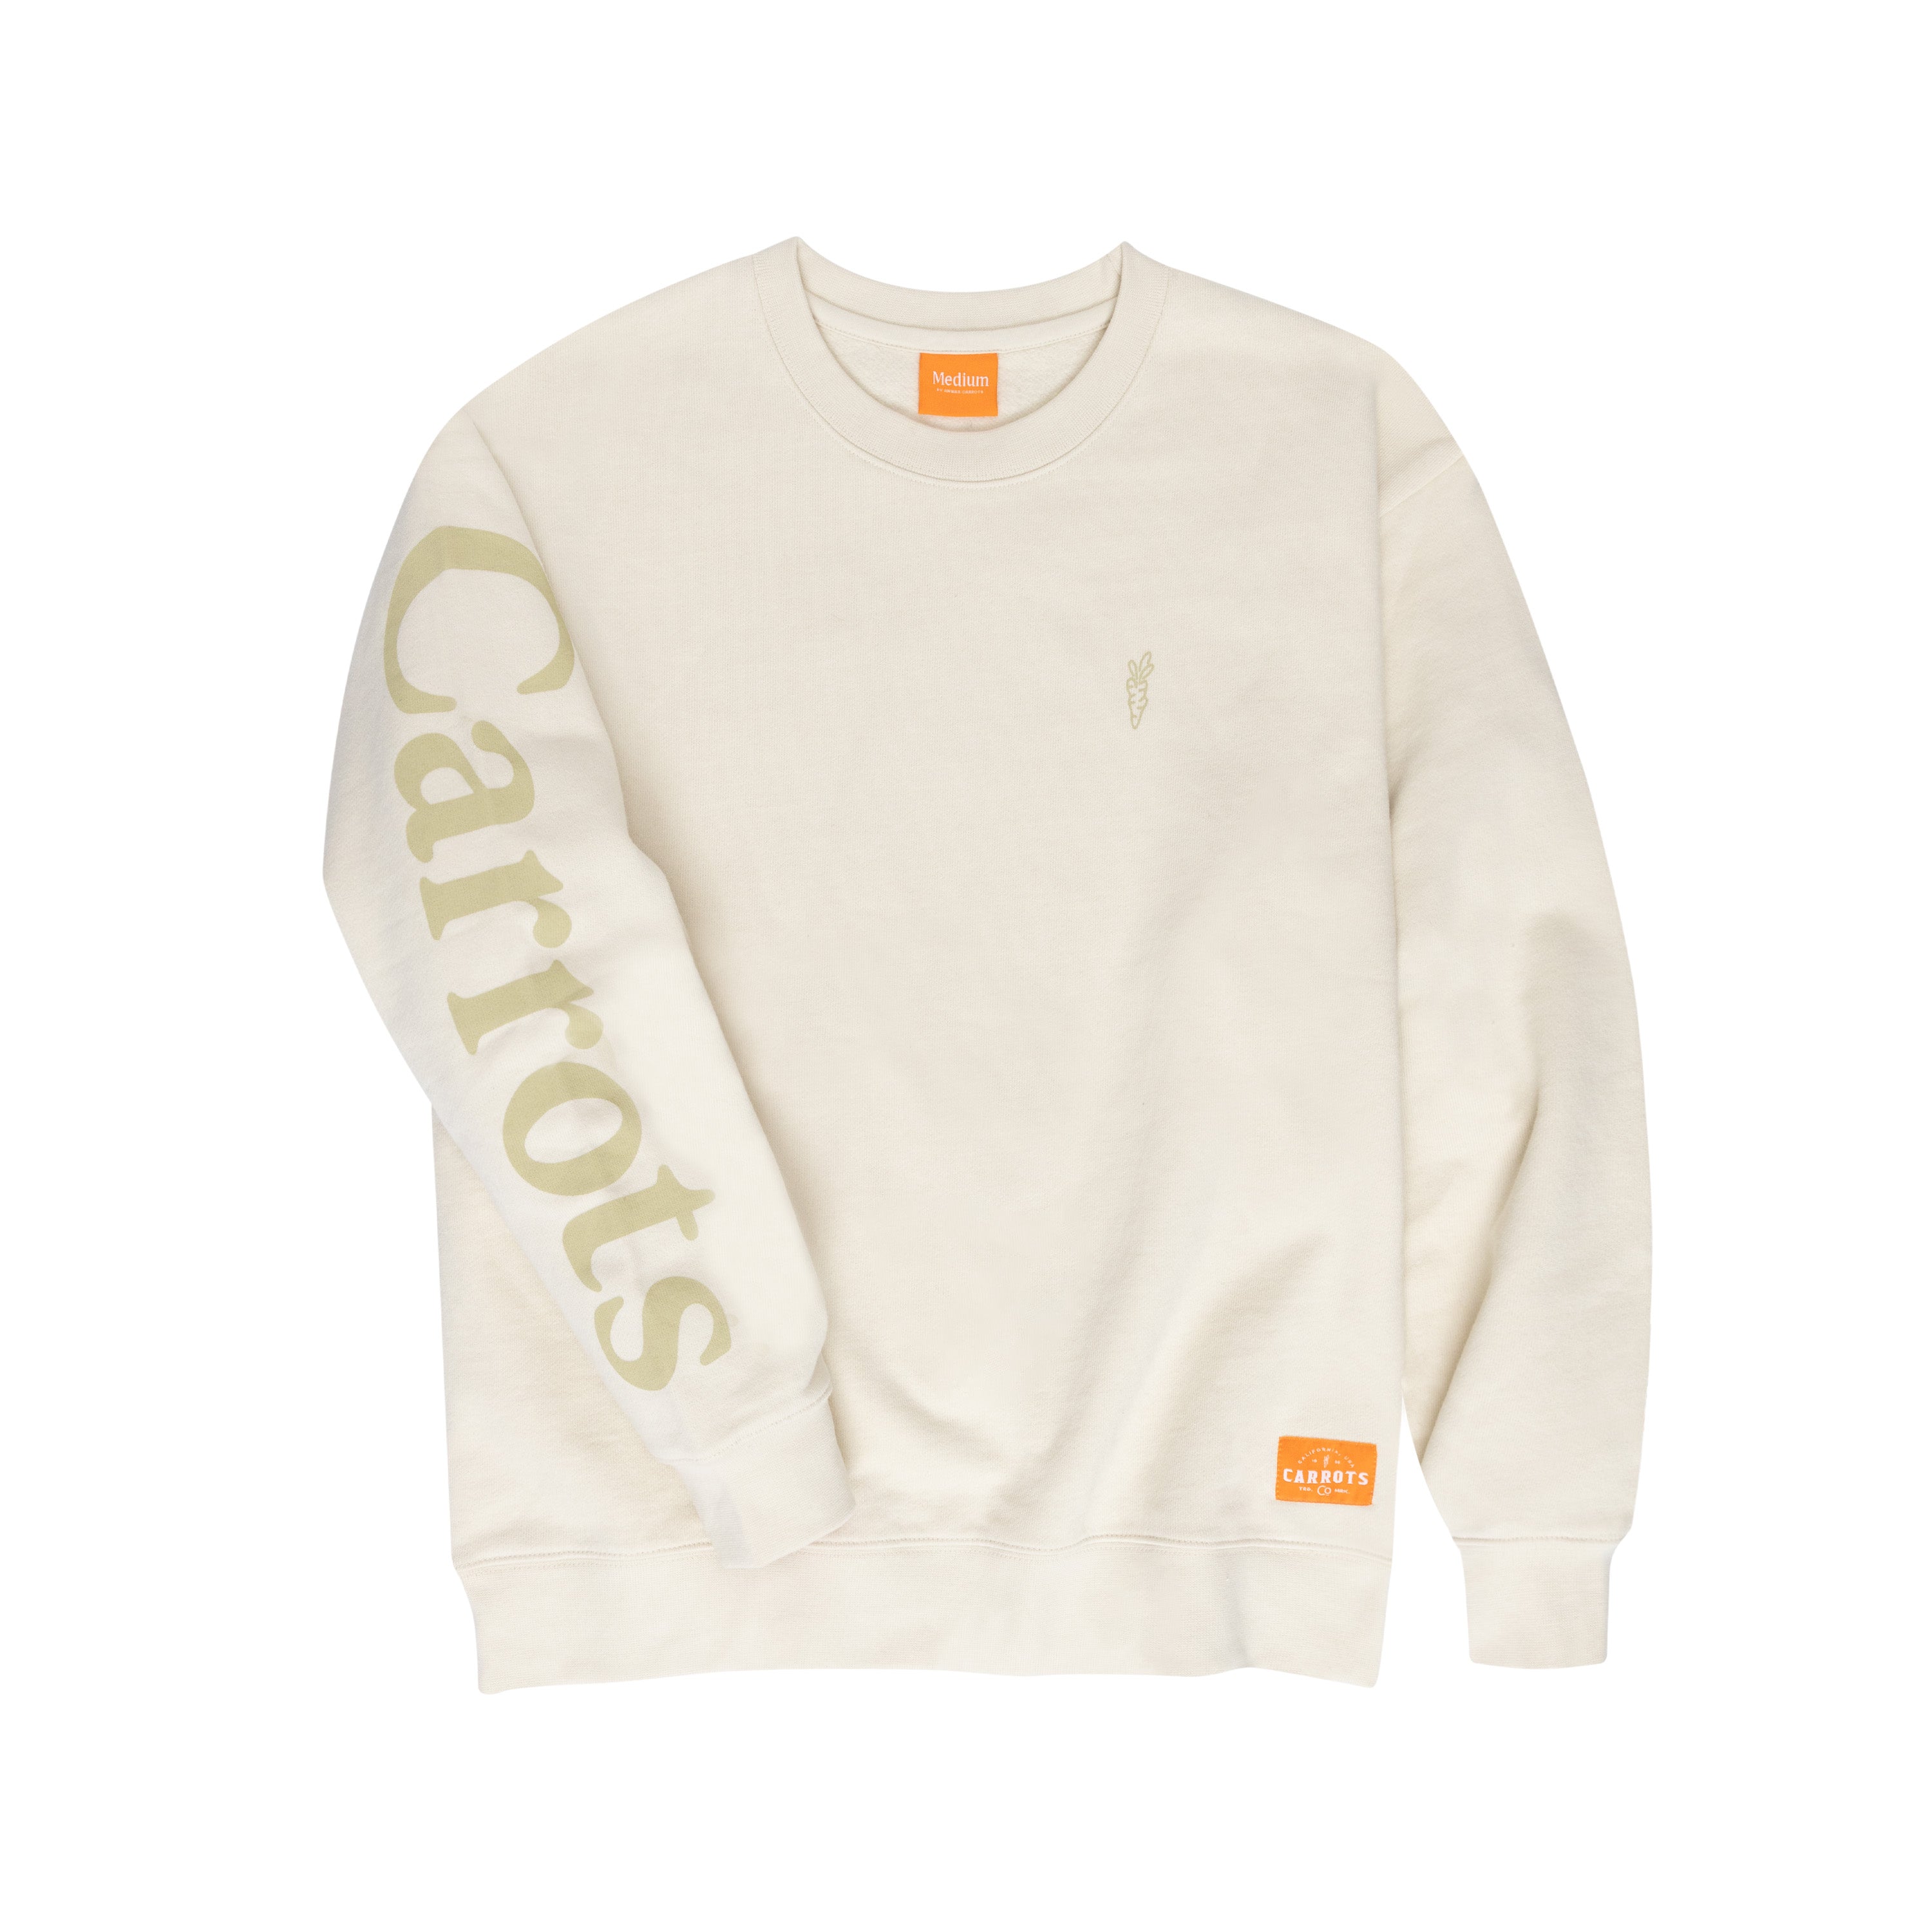 Sweatshirts | Collection | Carrots by Anwar Carrots – Carrots By